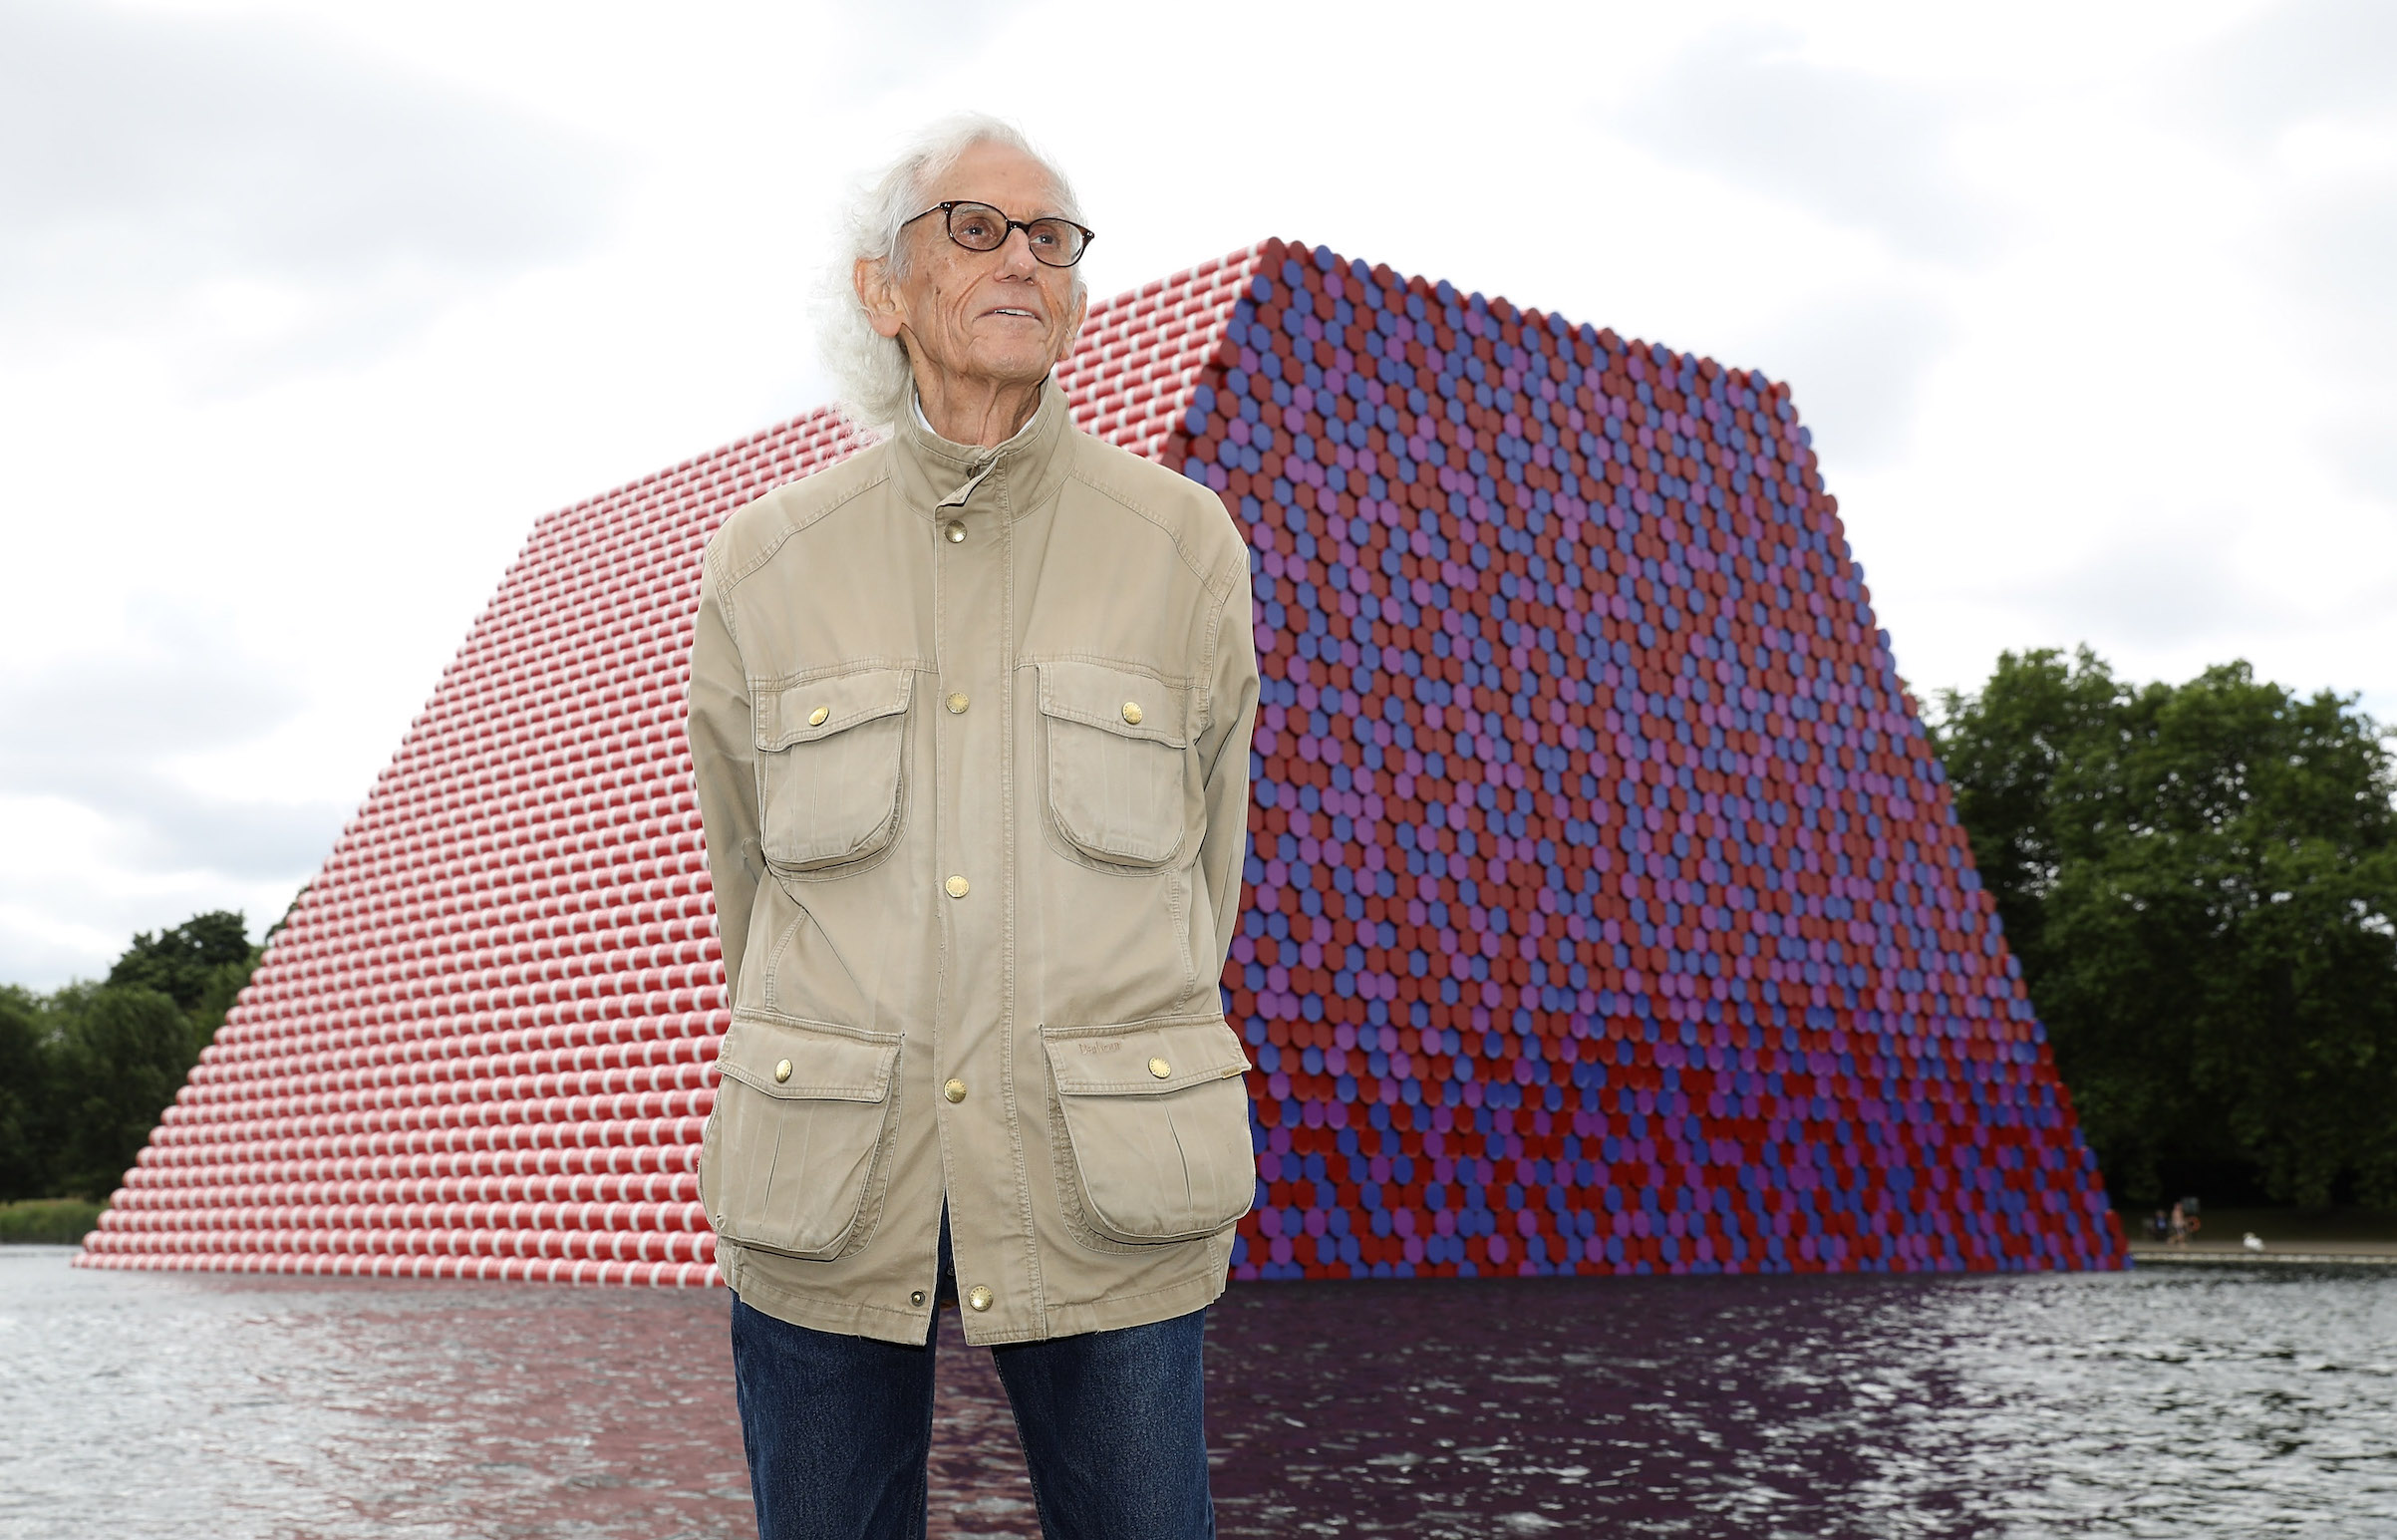 Christo unveils an installation on Serpentine Lake, with accompanying exhibition at the Serpentine Gallery on June 18, 2018 in London. (Tim P. Whitby—Getty Images)